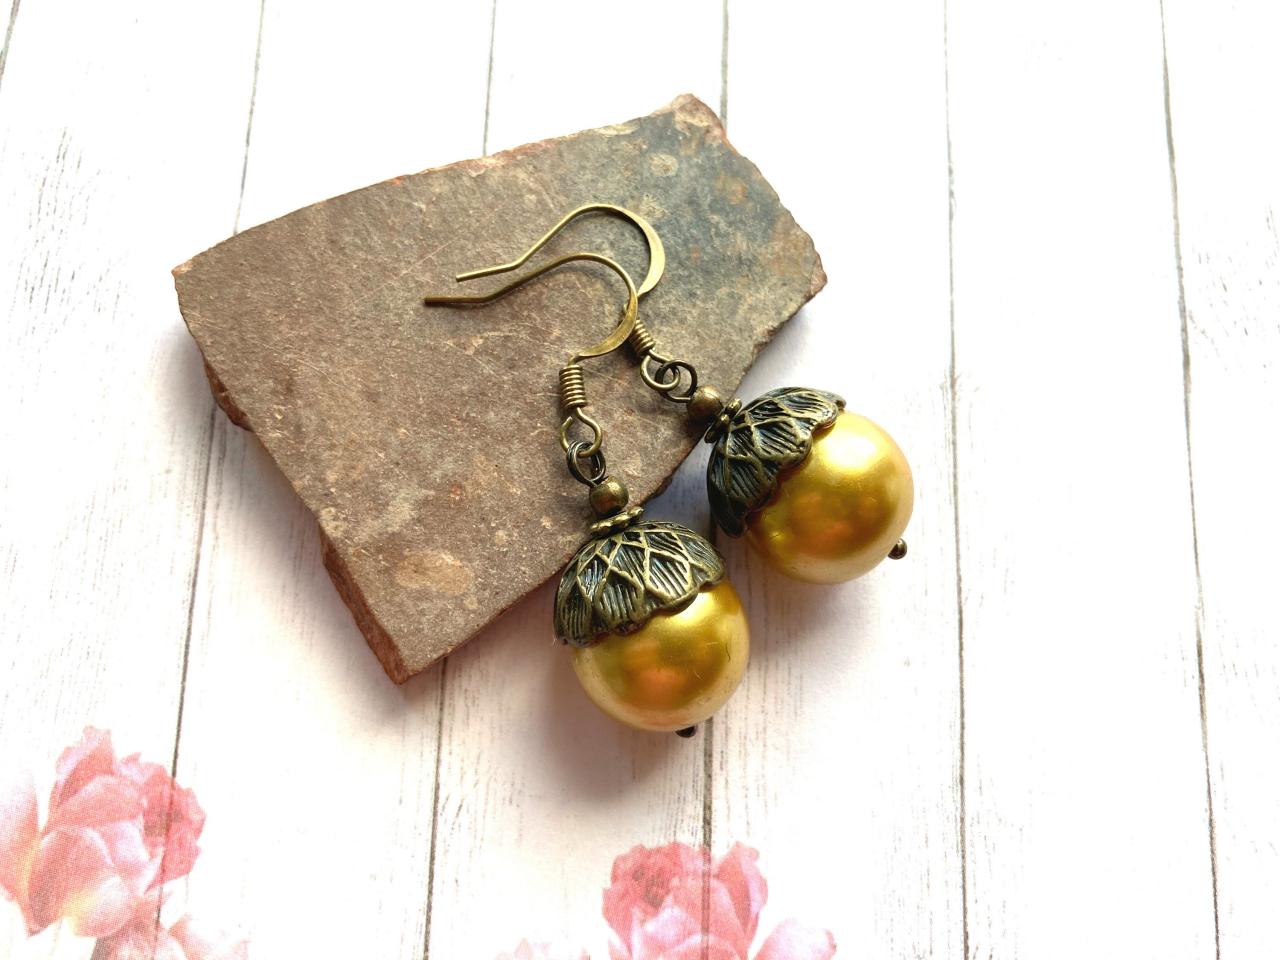 Vintage Inspired Acorn Earrings With A Gold Tone Glass Pearls, Selma Dreams